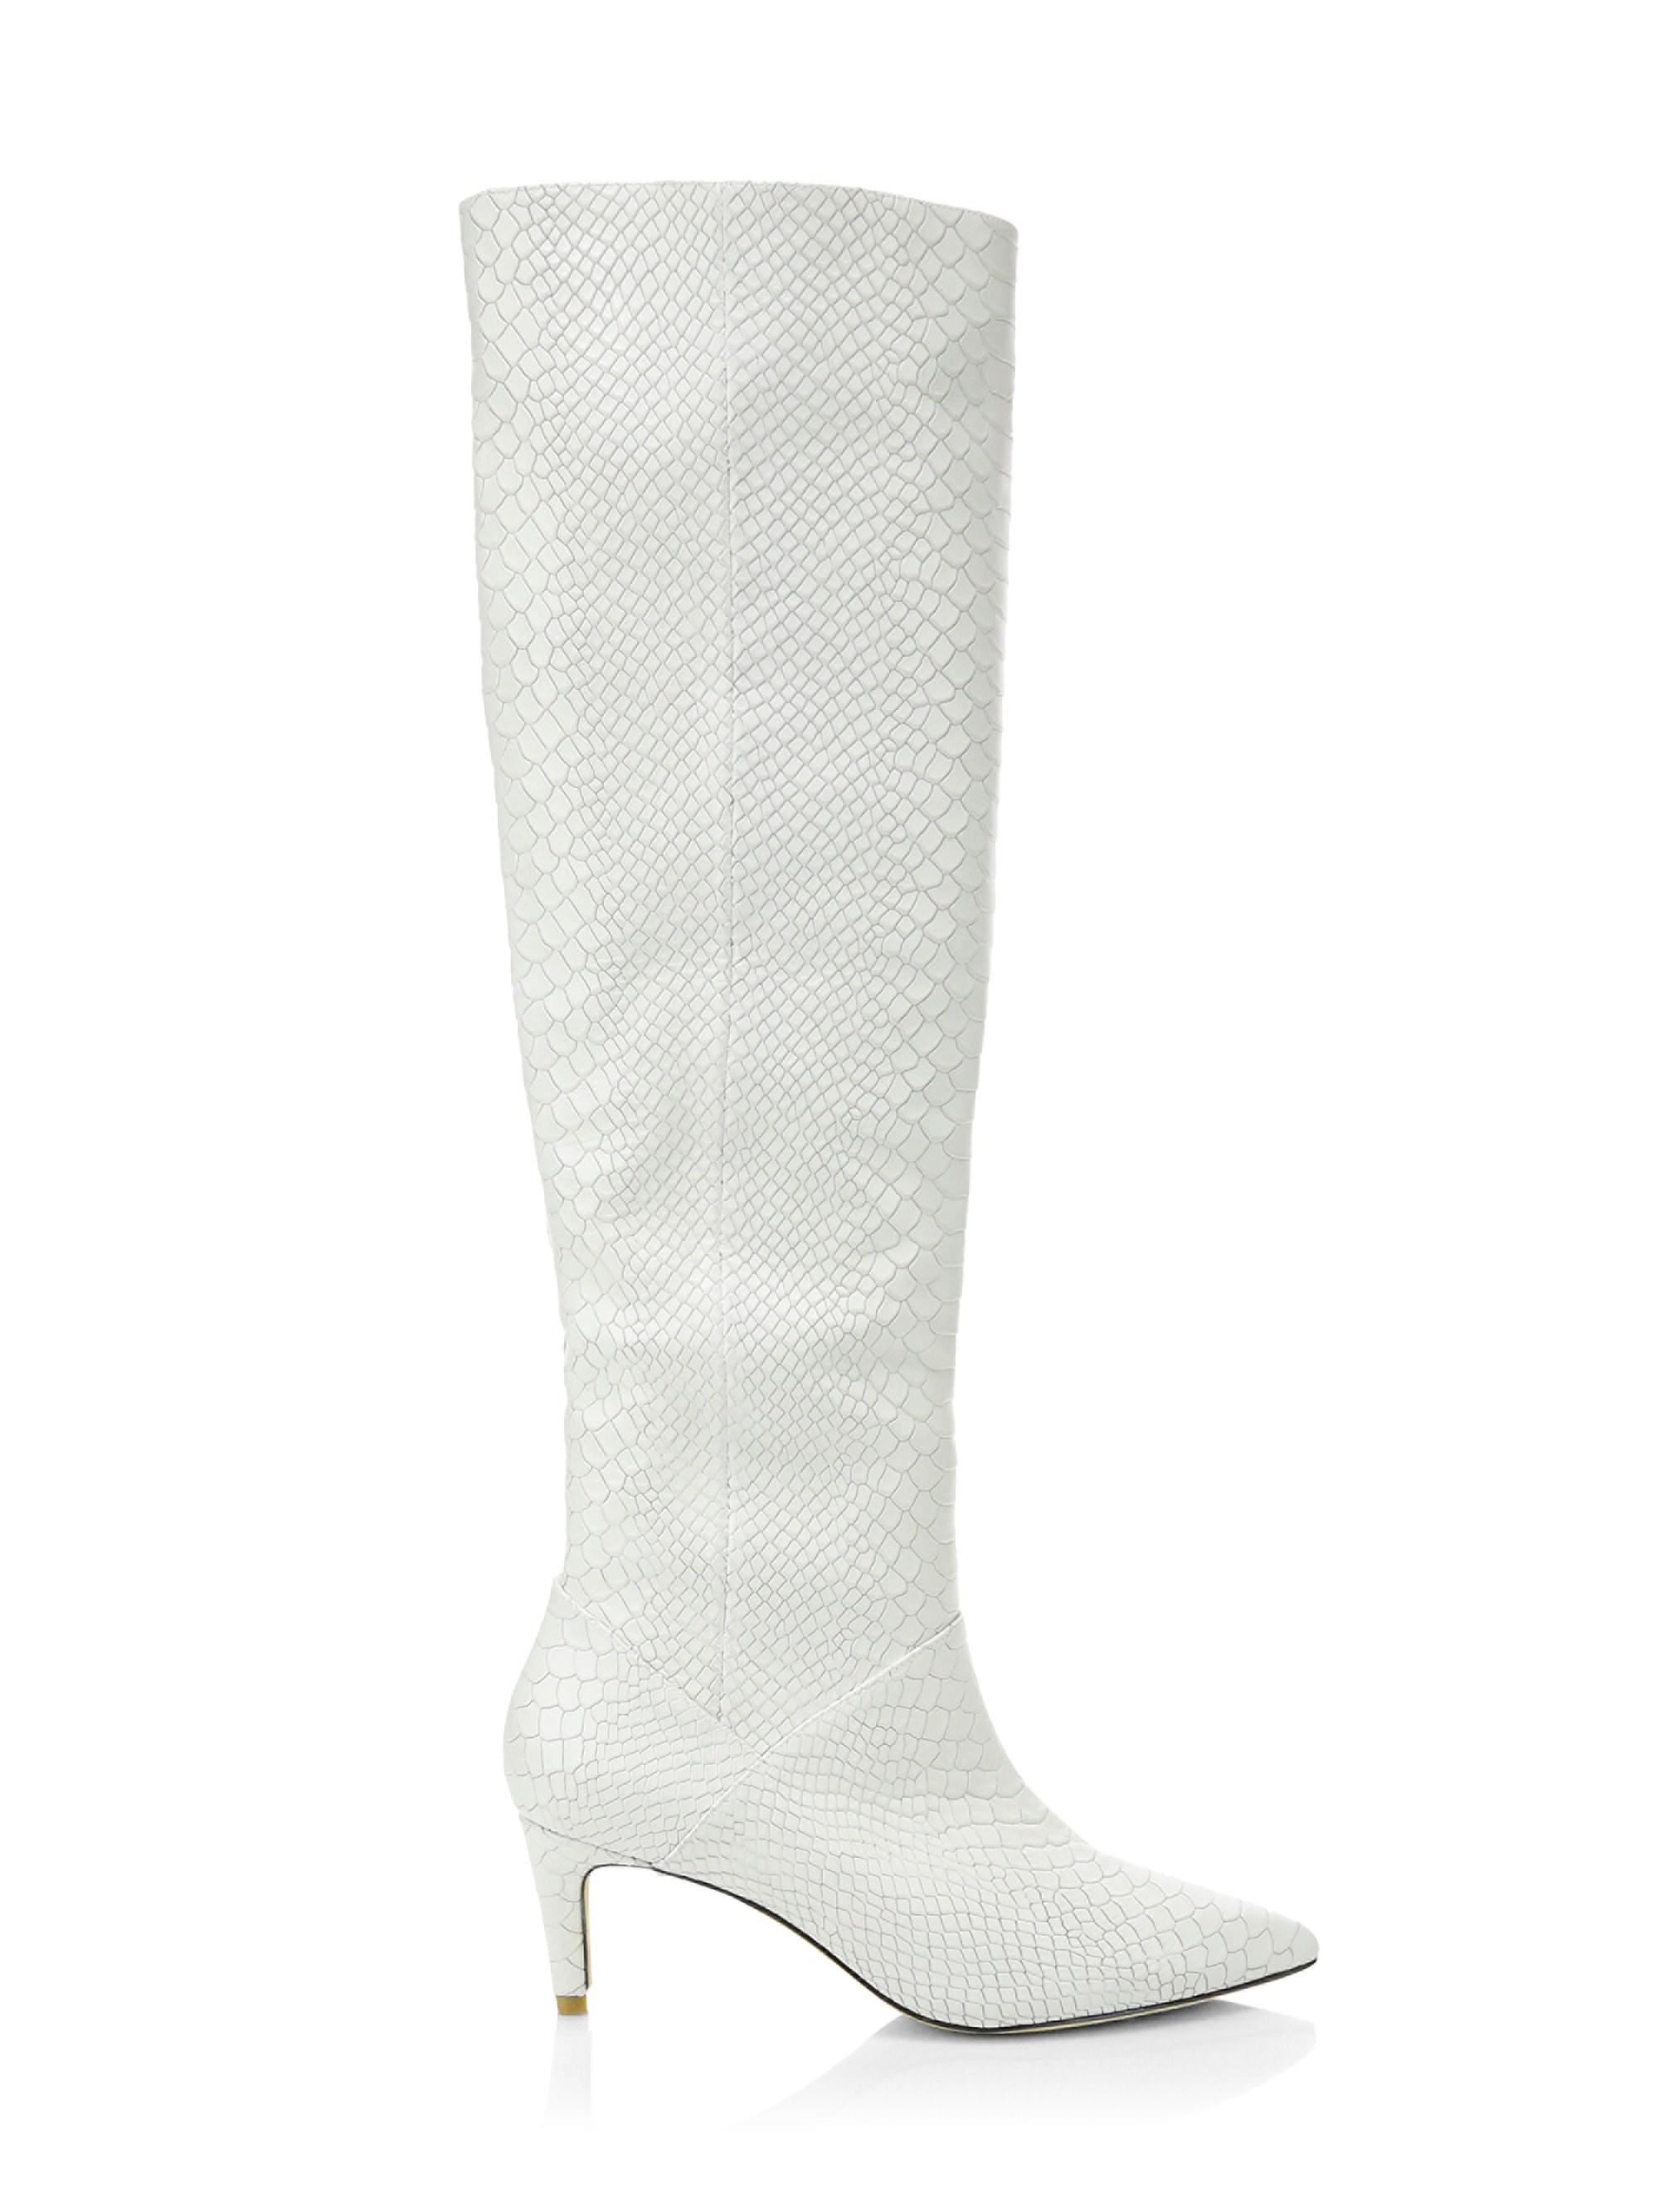 joie white booties